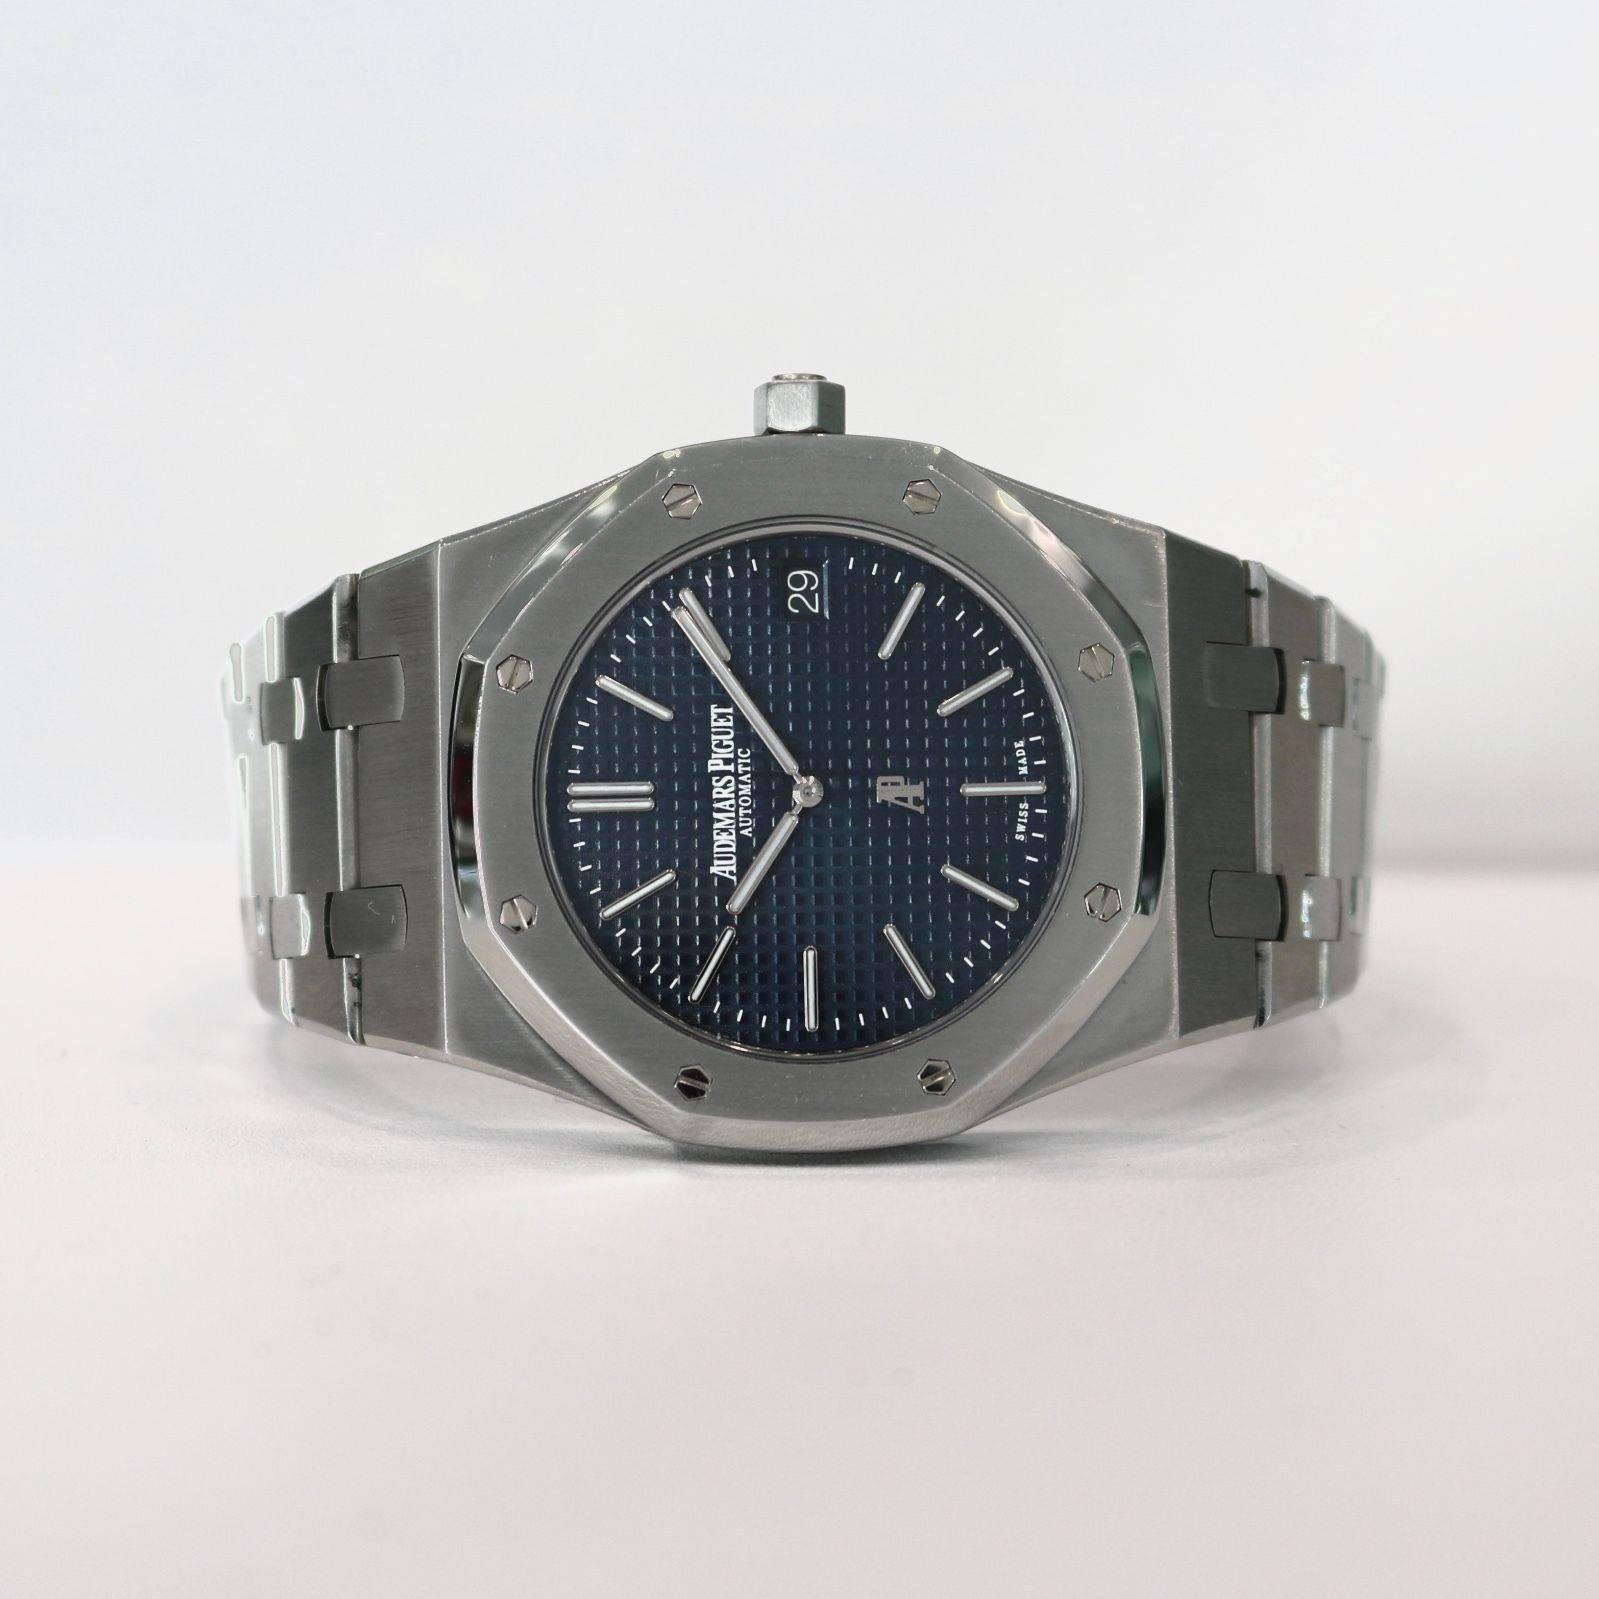 Brand Name: Audemars Piguet
Style Number: 15202ST.OO.1240ST.01
Also Called: Ultra Thin 15202
Series: Royal Oak Extra Thin
Gender: Men's
Case Material: Stainless Steel 
Dial Color	: Blue
Movement: Automatic
Engine: AP Cal. 2121 beats at